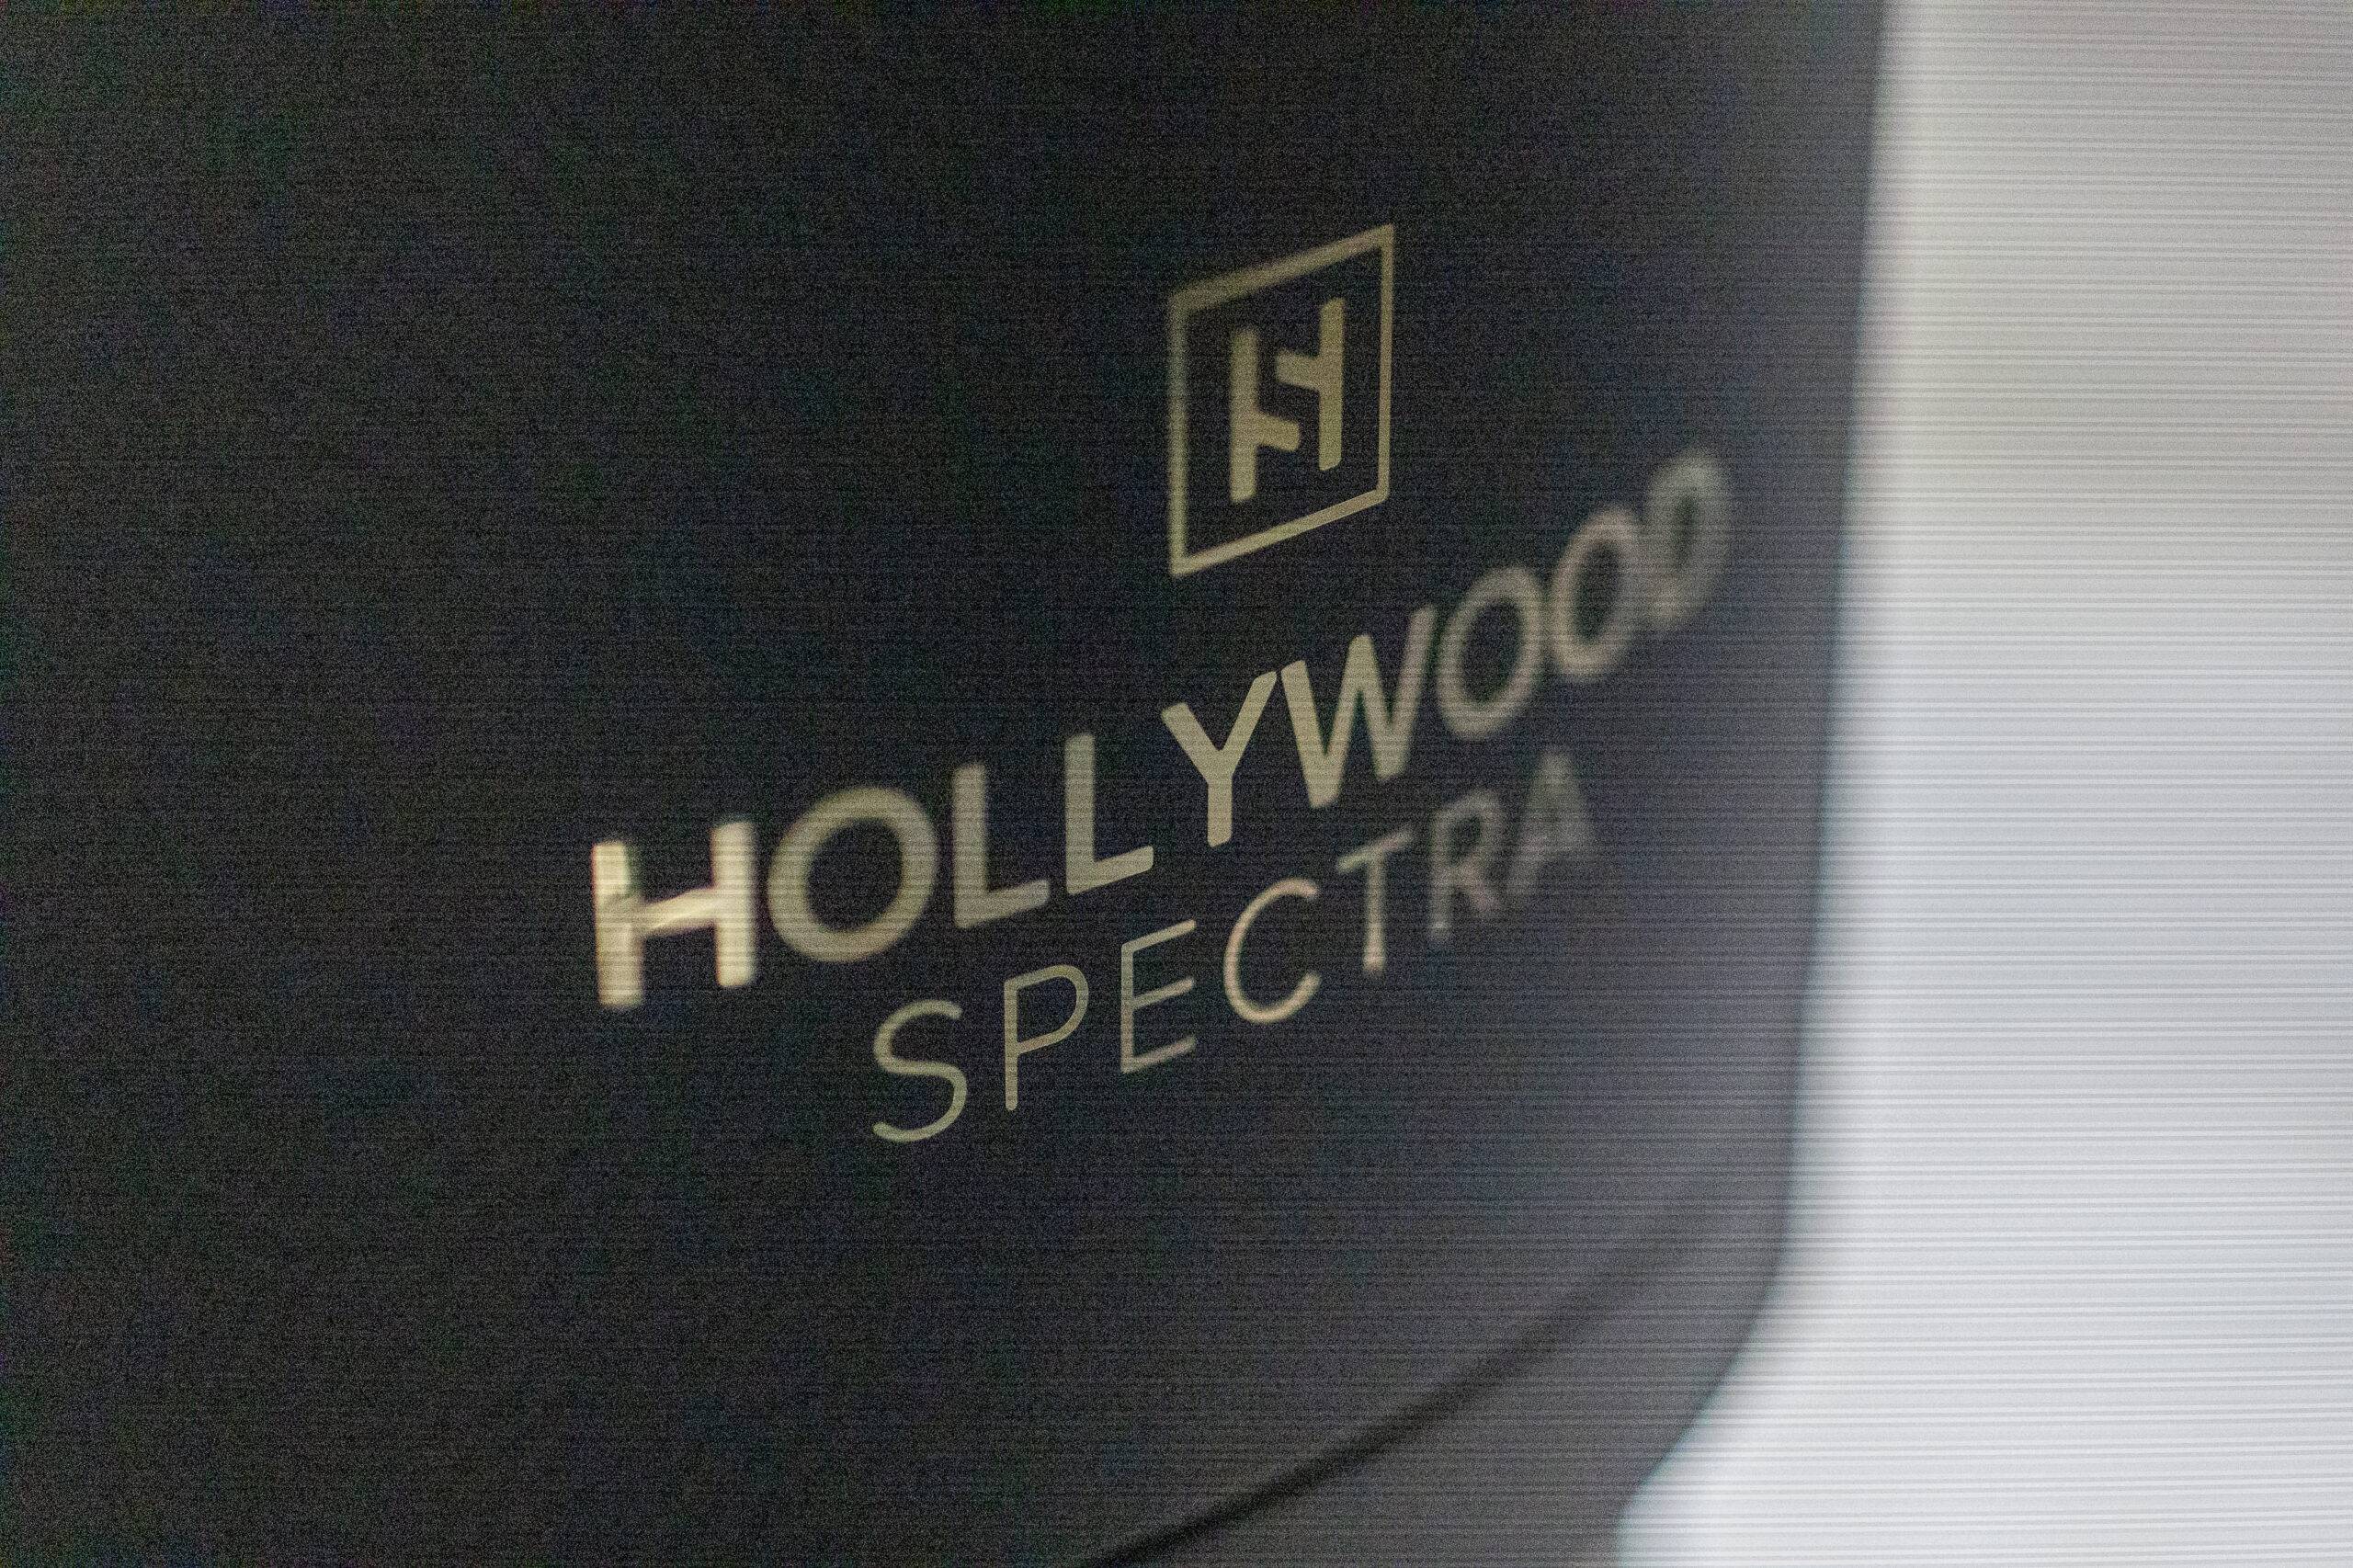 Close-up view of a black cylindrical object labeled "Spectra Laser" and a square logo featuring the letters "hj" printed in white.